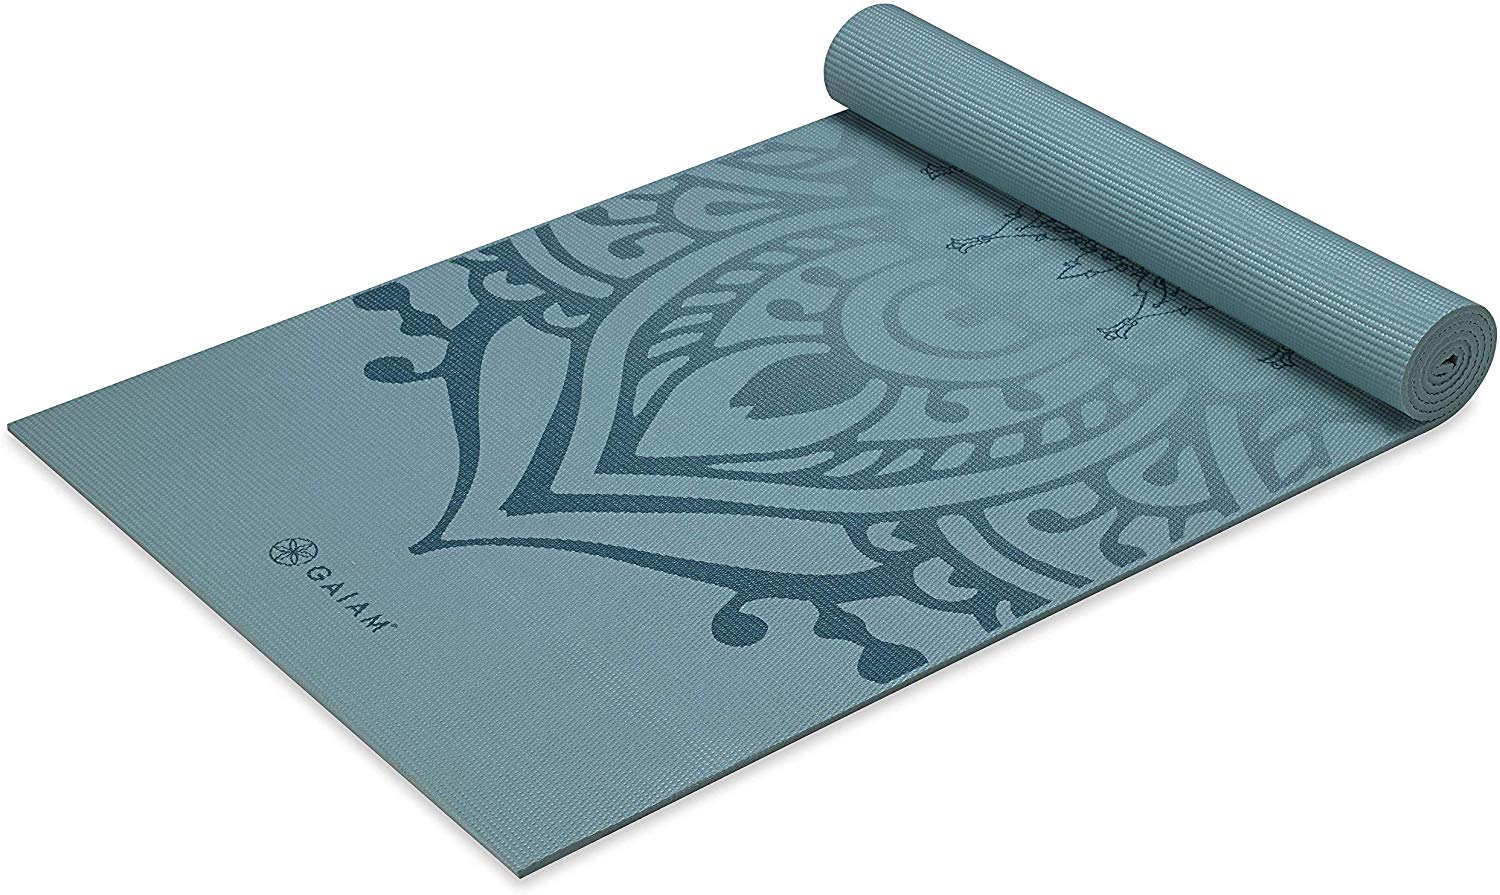 Gaiam 6mm Extra Thick Yoga Mat